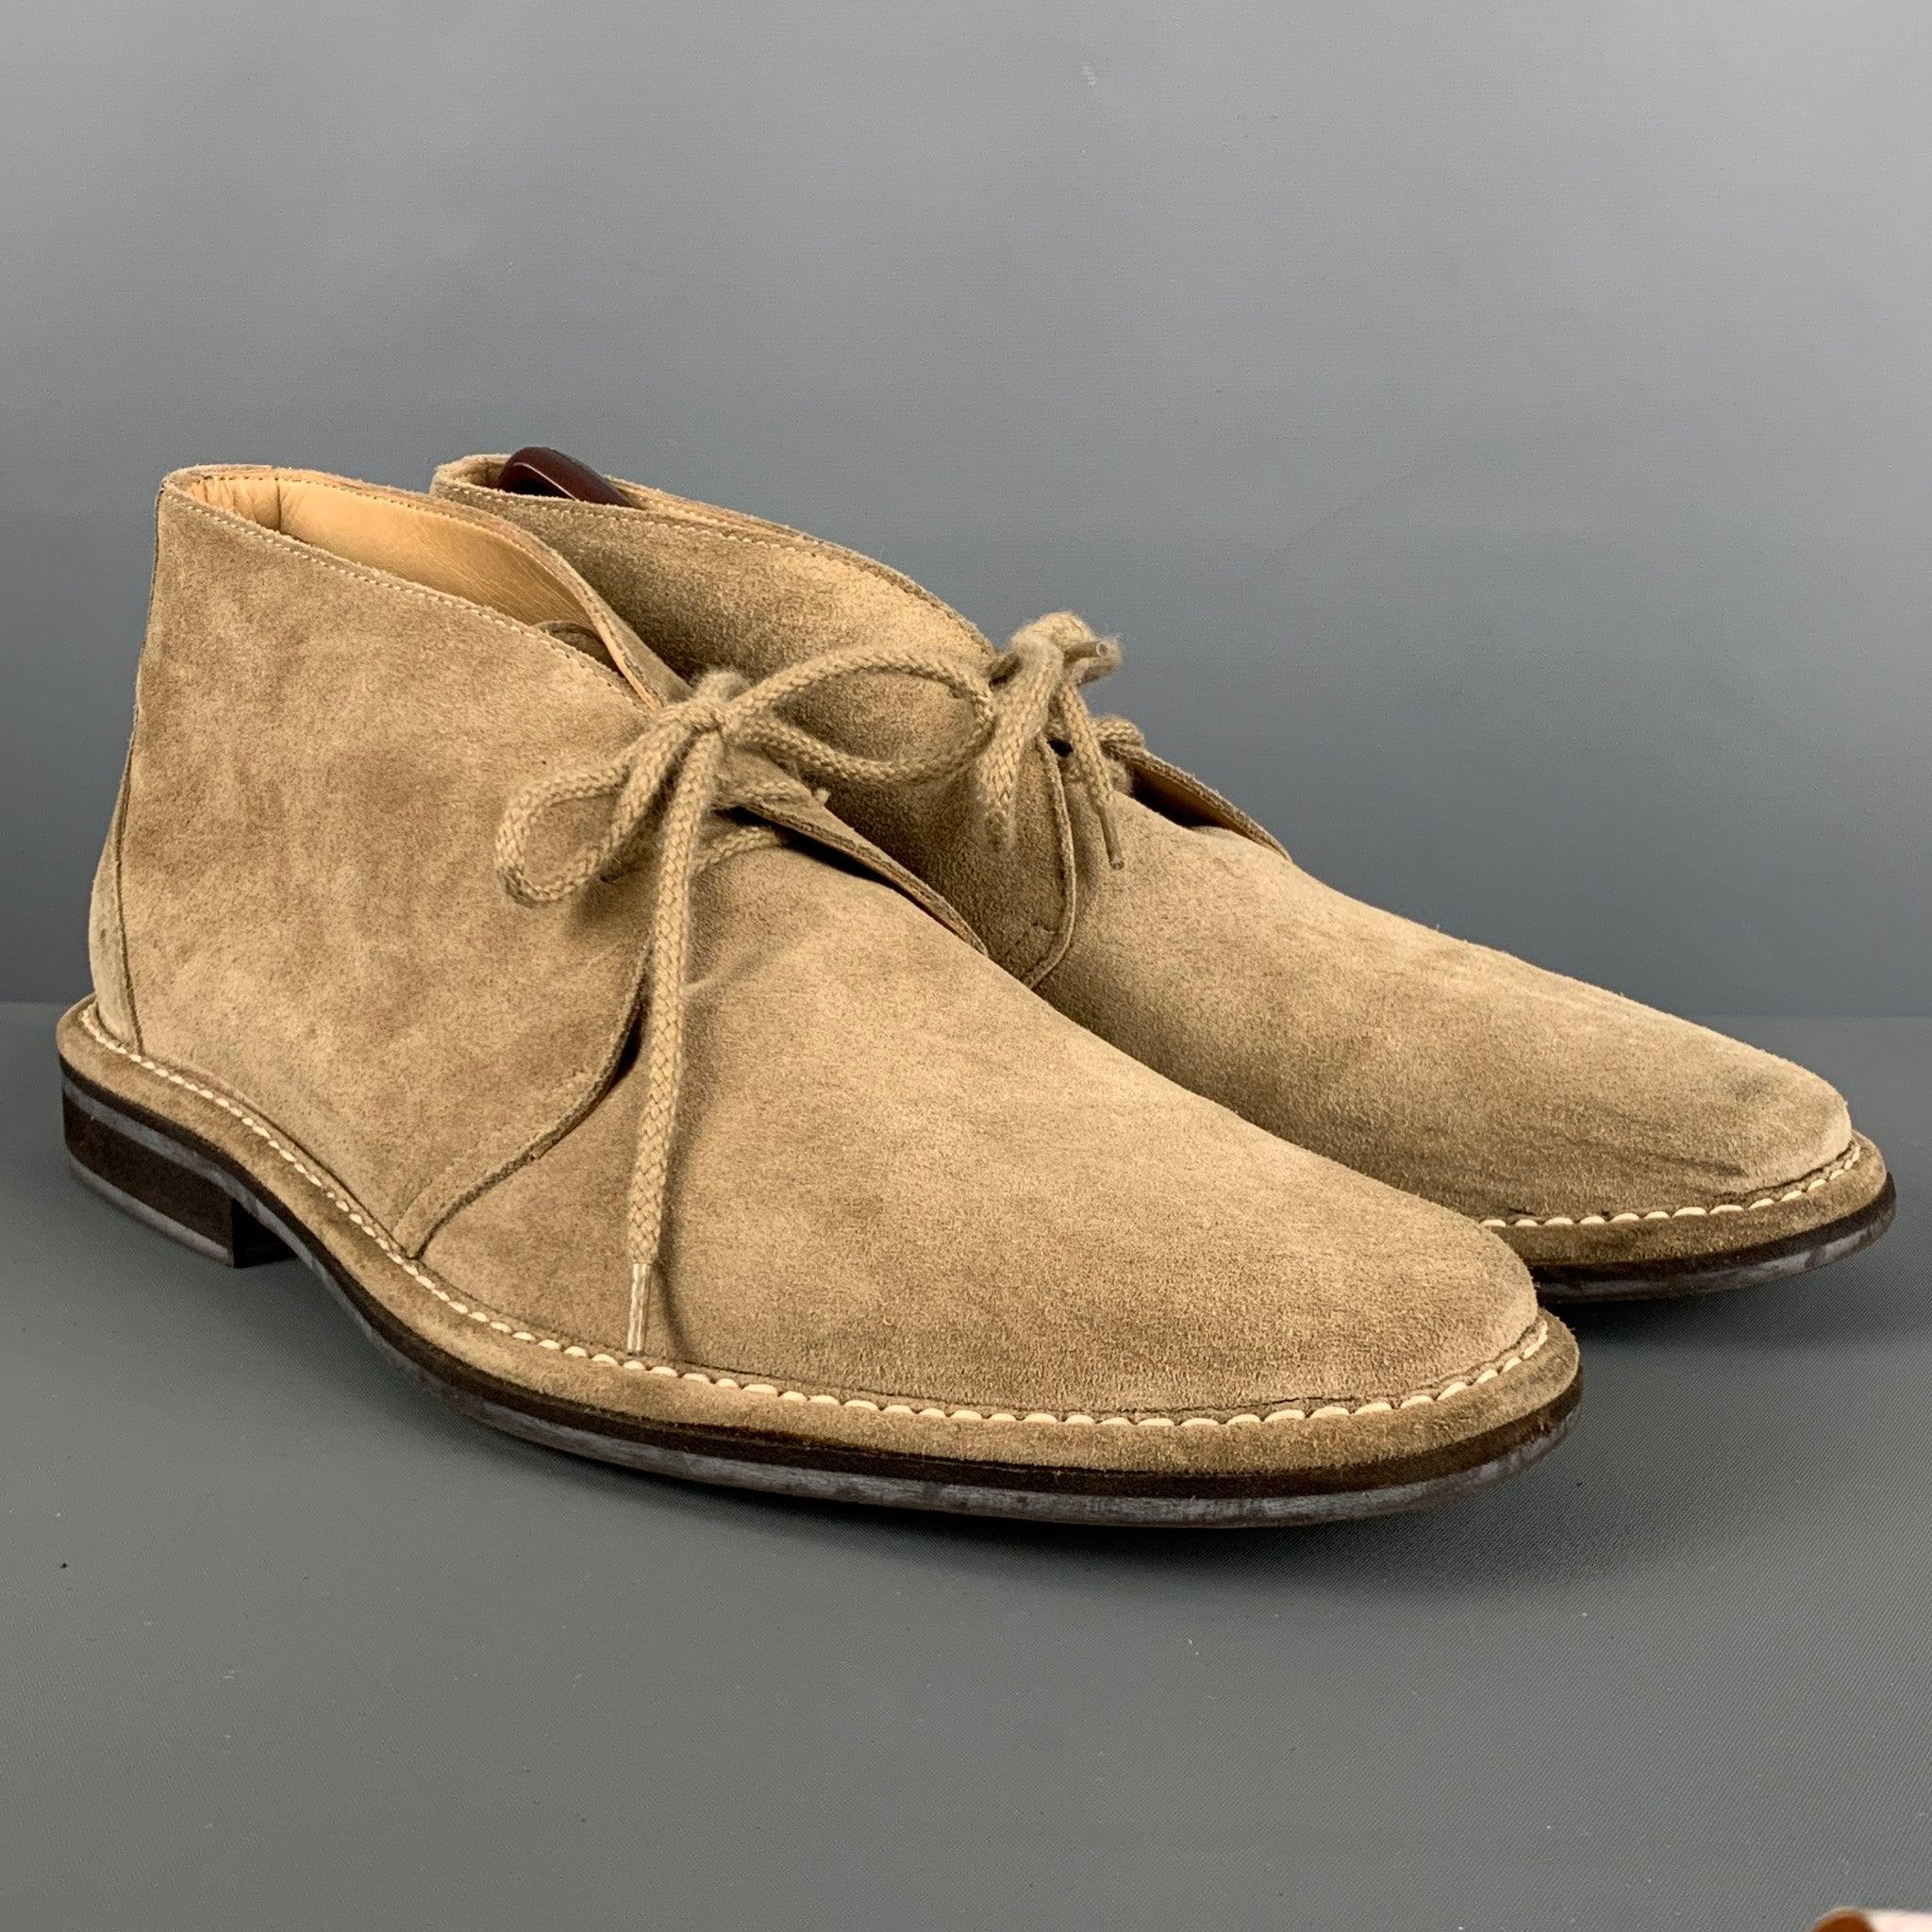 COACH boots comes in a beige suede featuring a chukka style, round toe, and a lace up closure. Comes with box. Made in Italy.Very Good Pre-Owned Condition. 

Marked:   10 1/2 DP 982G05 

Measurements: 
  Length: 13 inches Width: 4.75 inches Height: